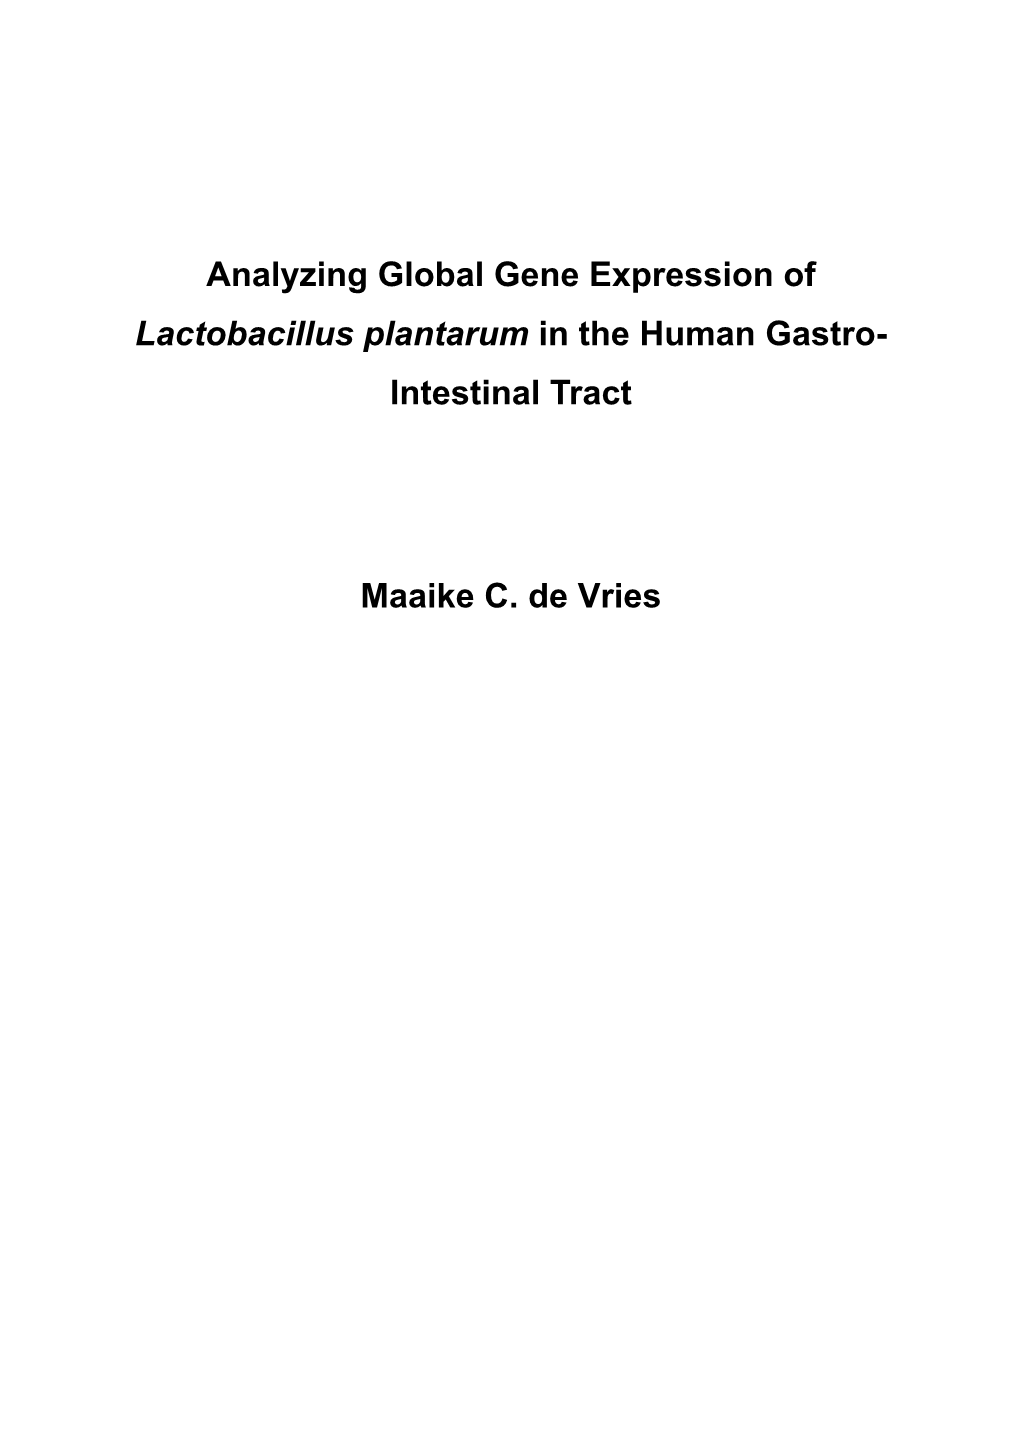 Analyzing Global Gene Expression of Lactobacillus Plantarum in the Human Gastro- Intestinal Tract